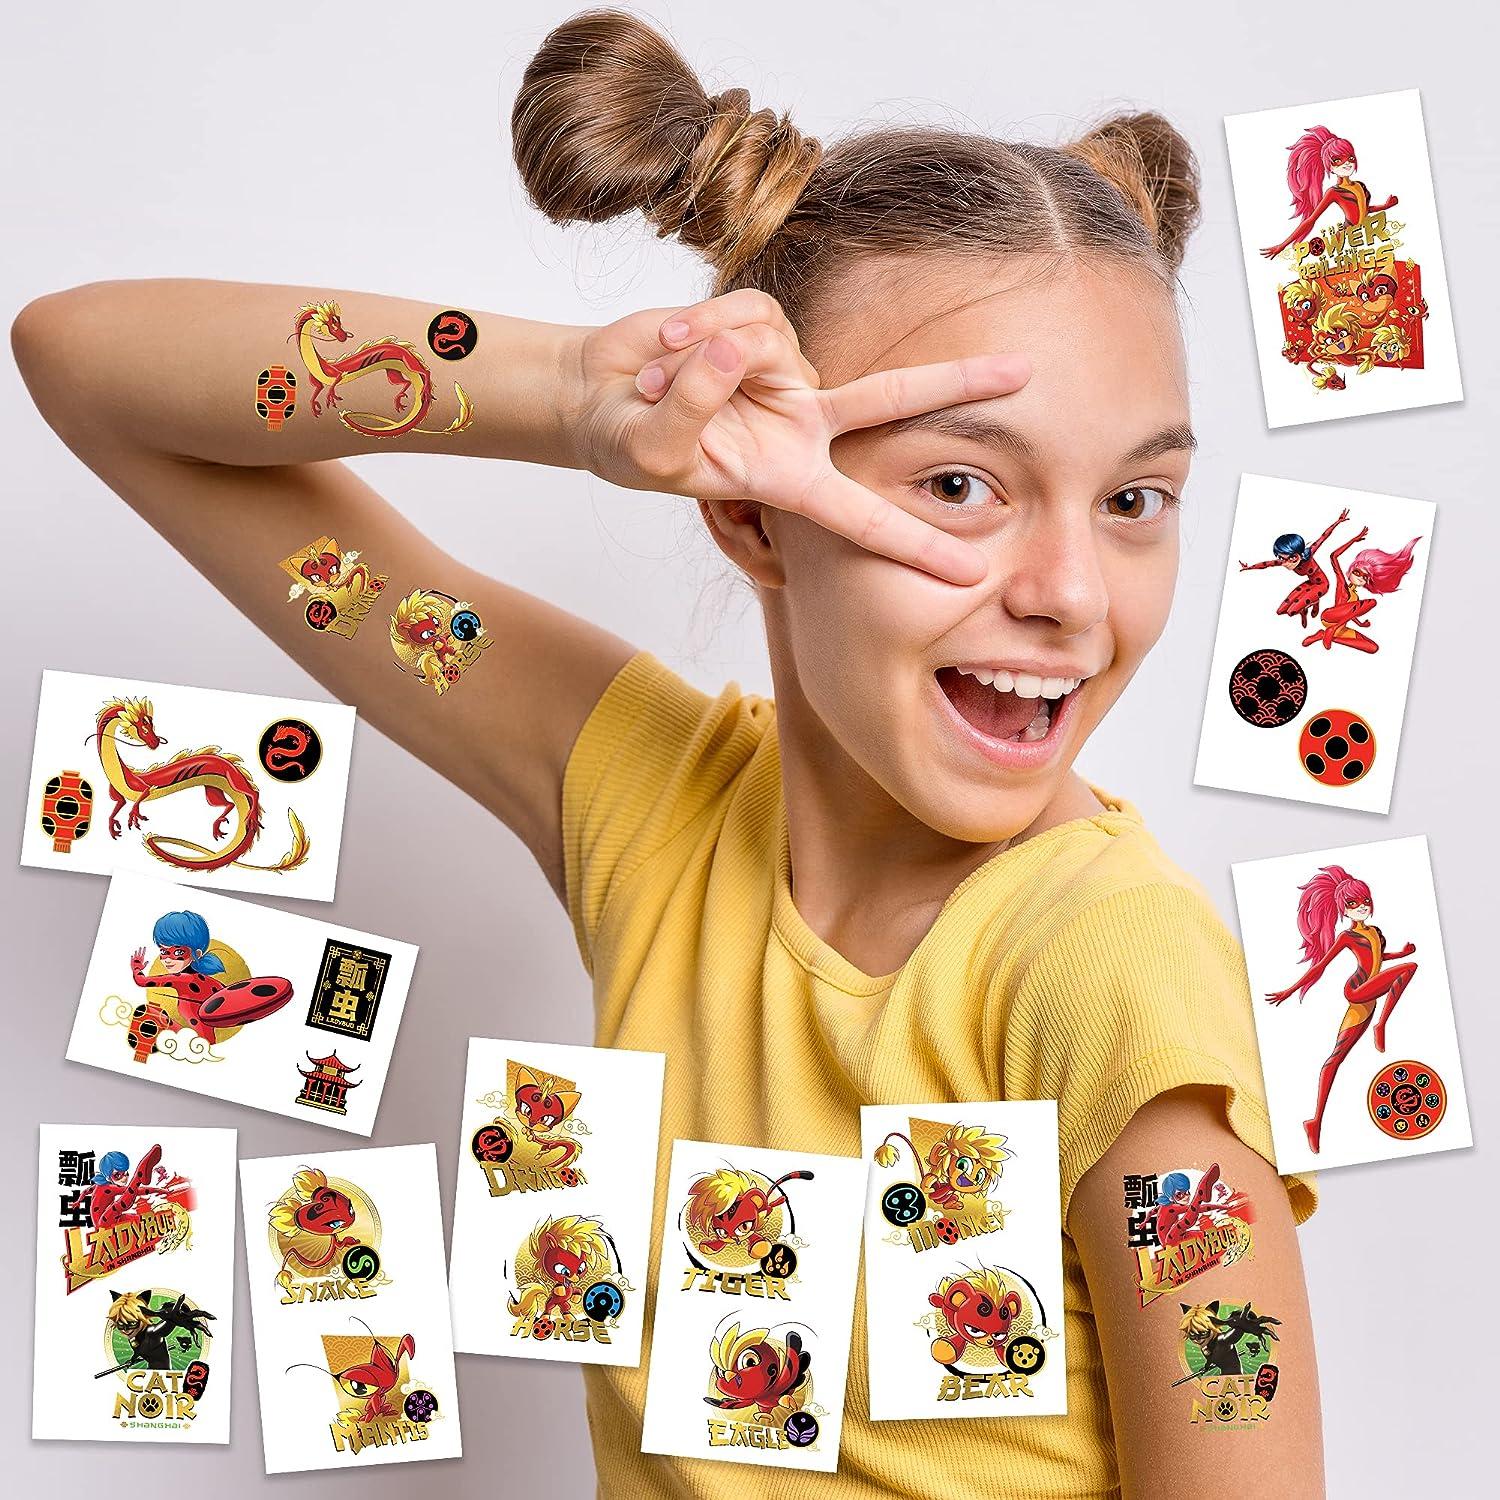 Miraculous World: Shanghai – The Legend of Ladydragon Temporary Tattoos |  10 Sheets 15 Images Gold Metallic Accents | Ladybug - Cat Noir - Lady  Dragon